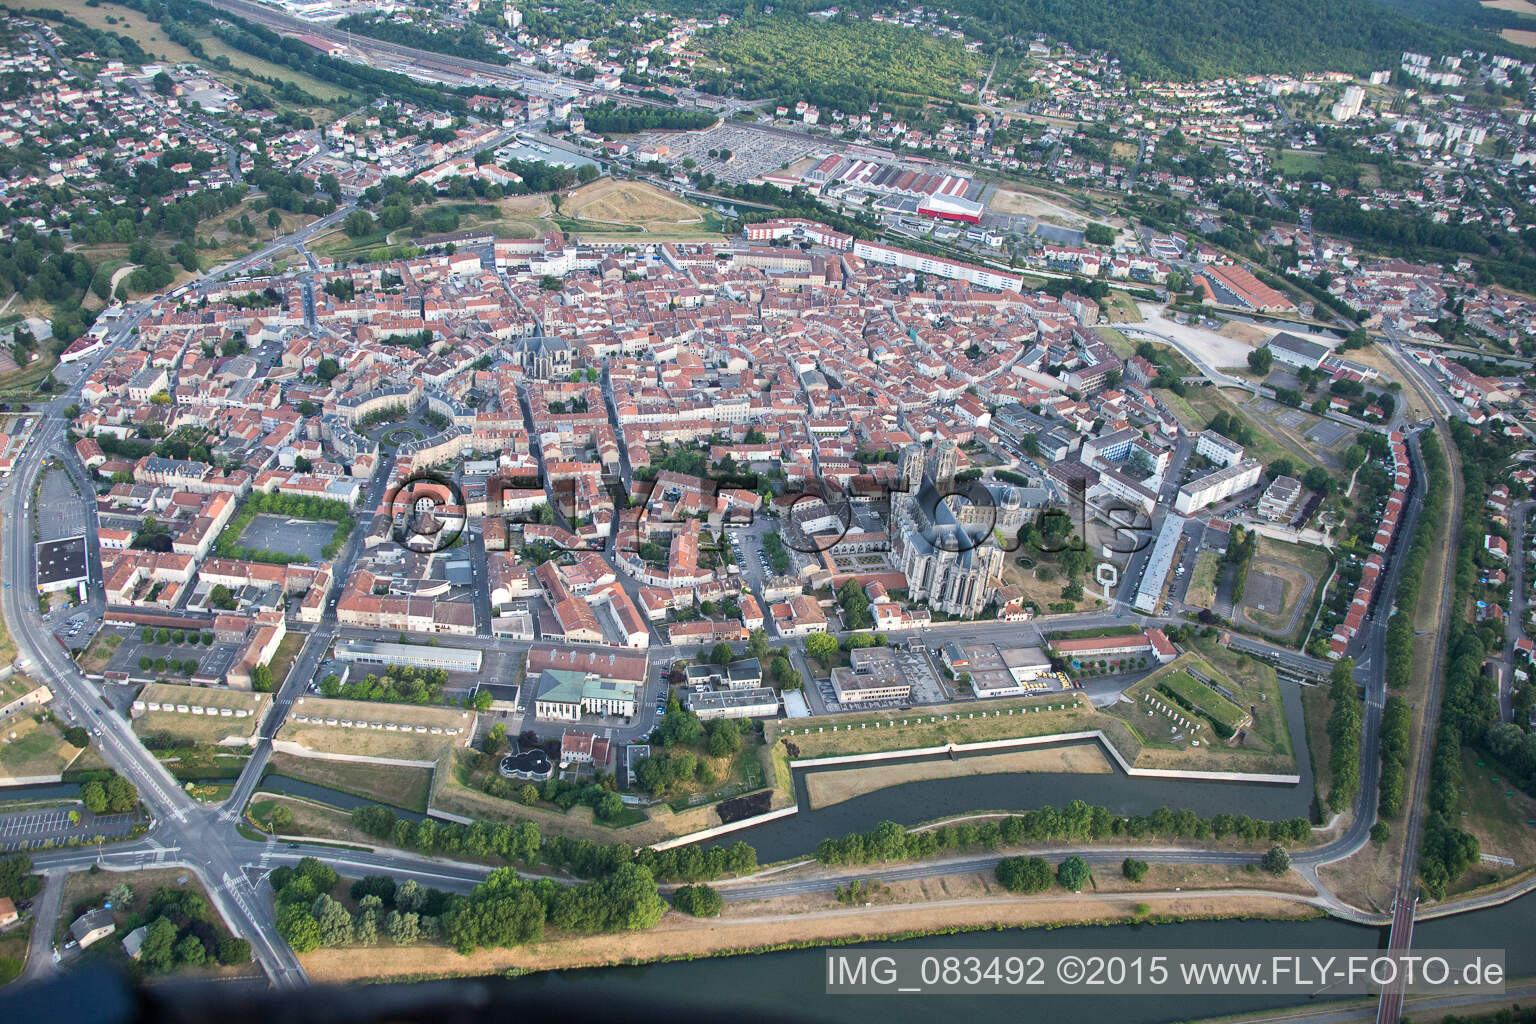 Toul in the state Meurthe et Moselle, France from a drone